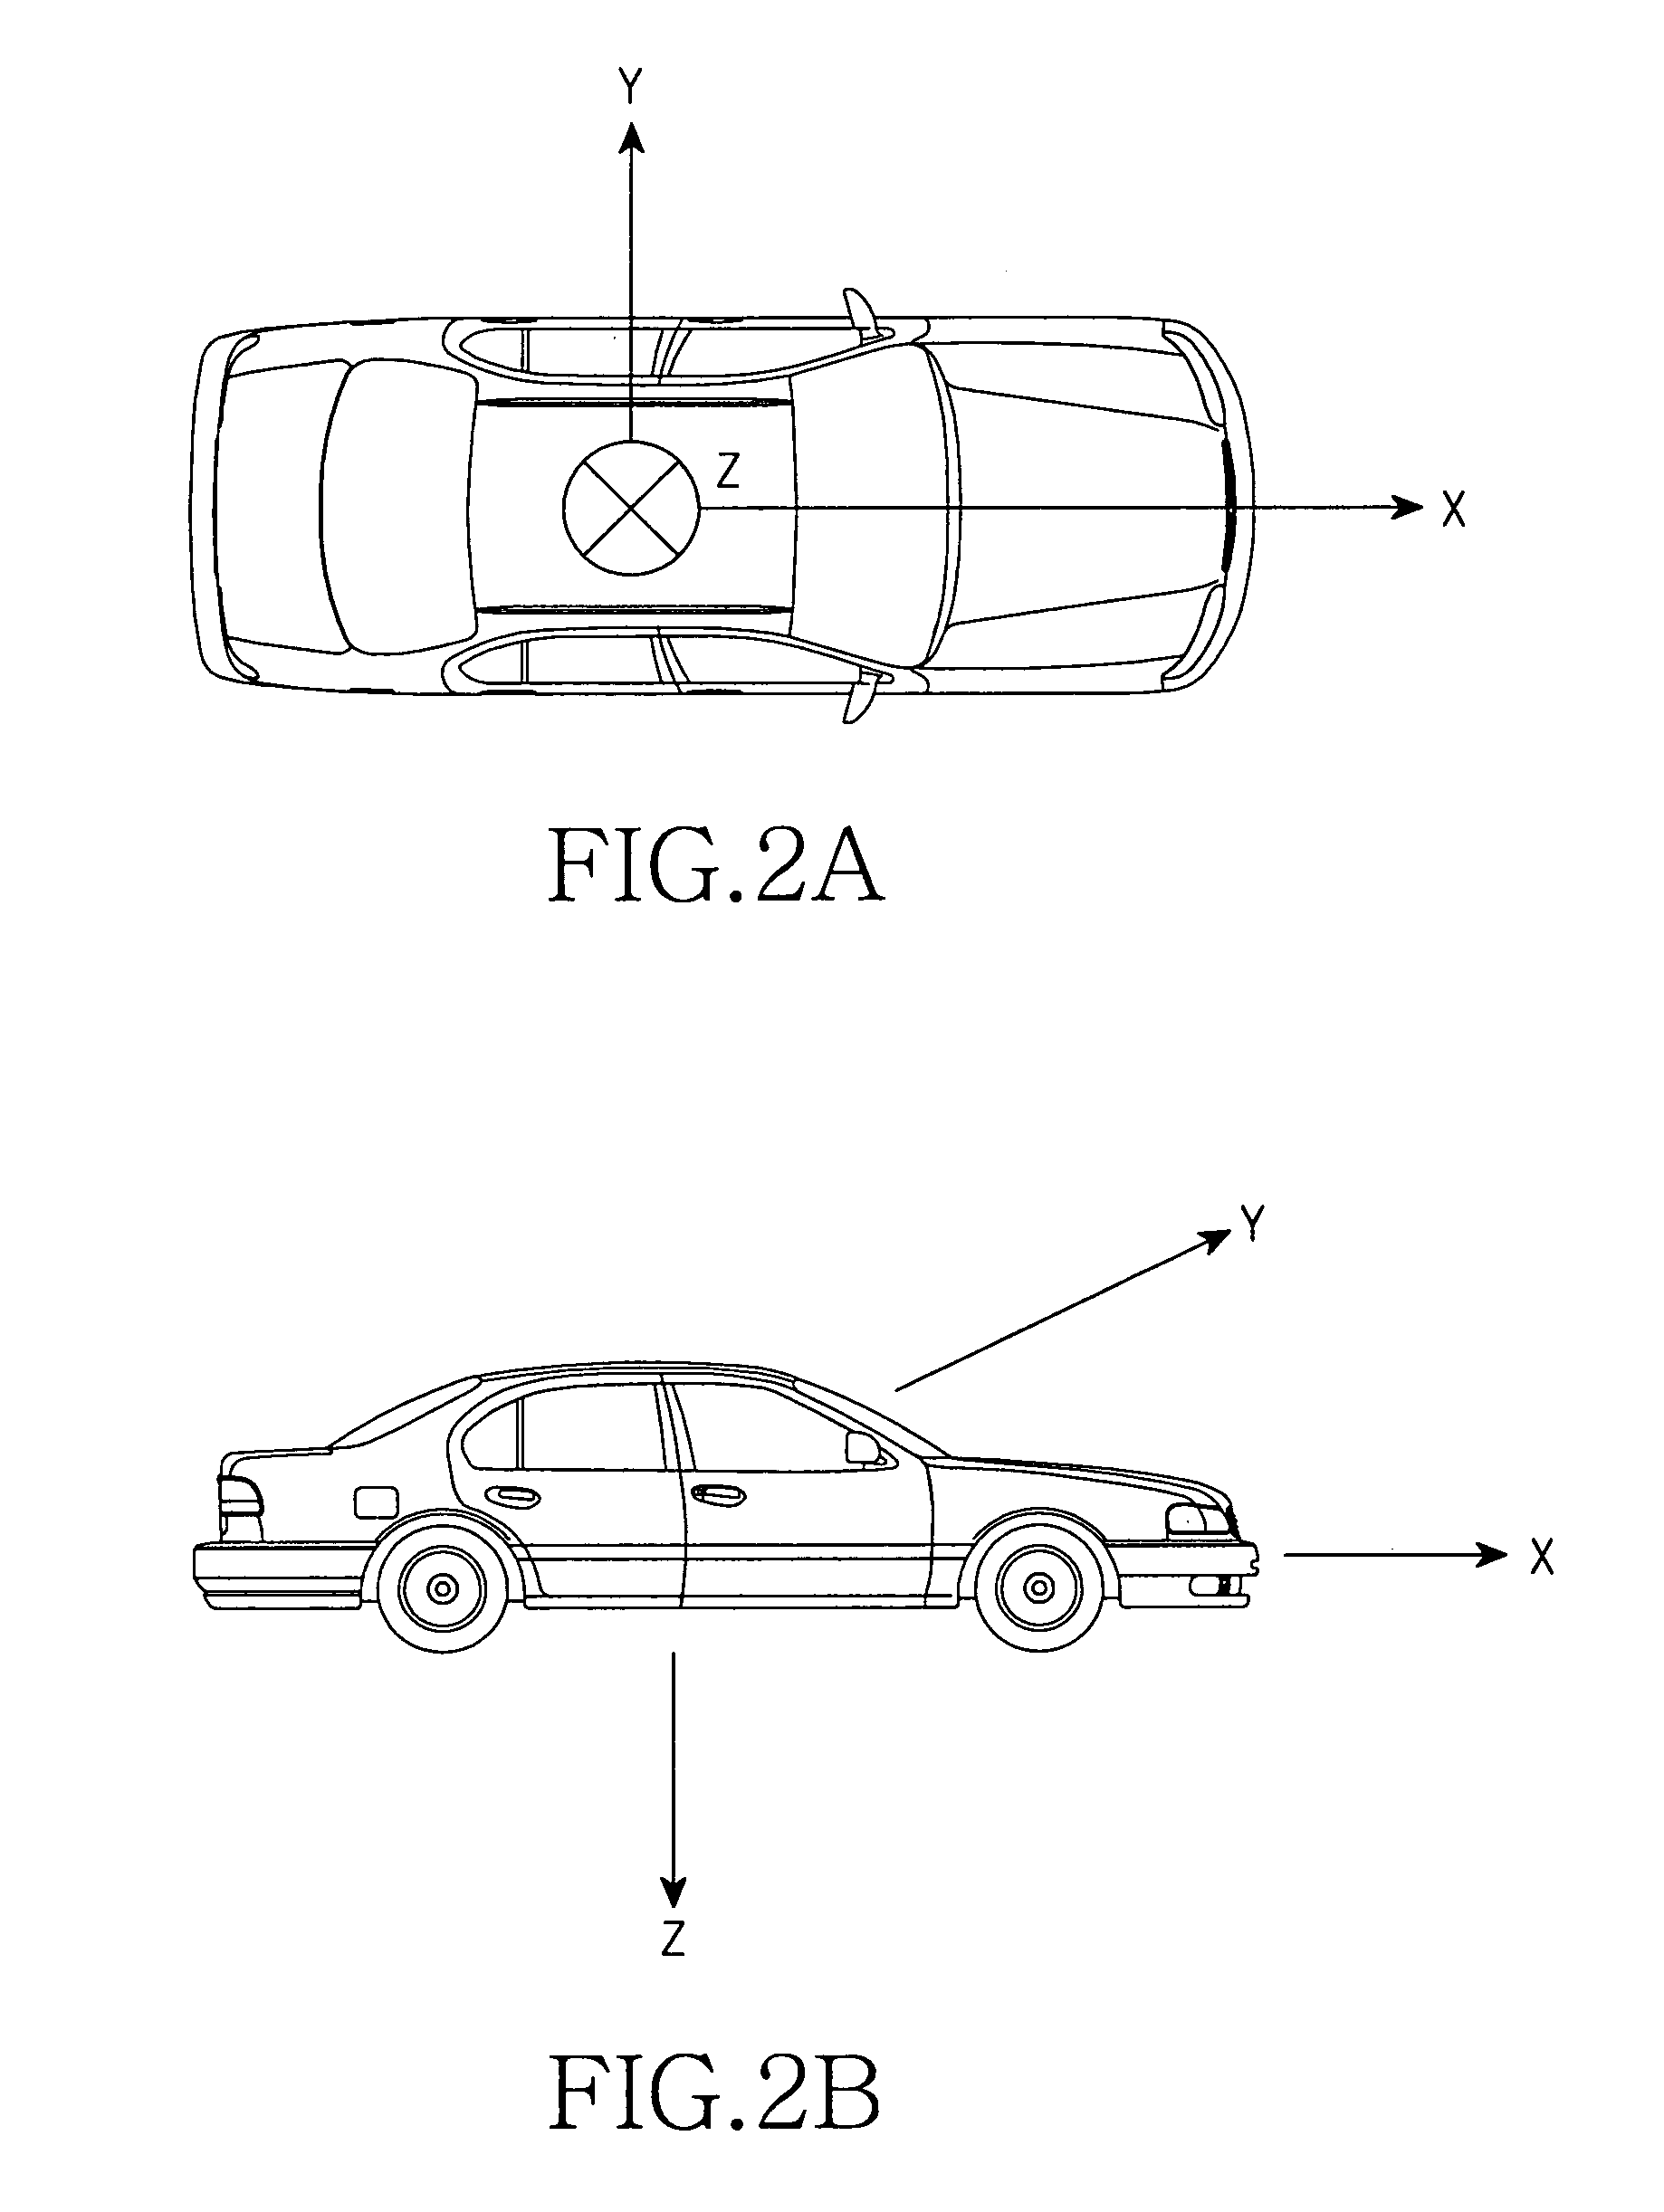 Apparatus and method for measuring speed of a moving object